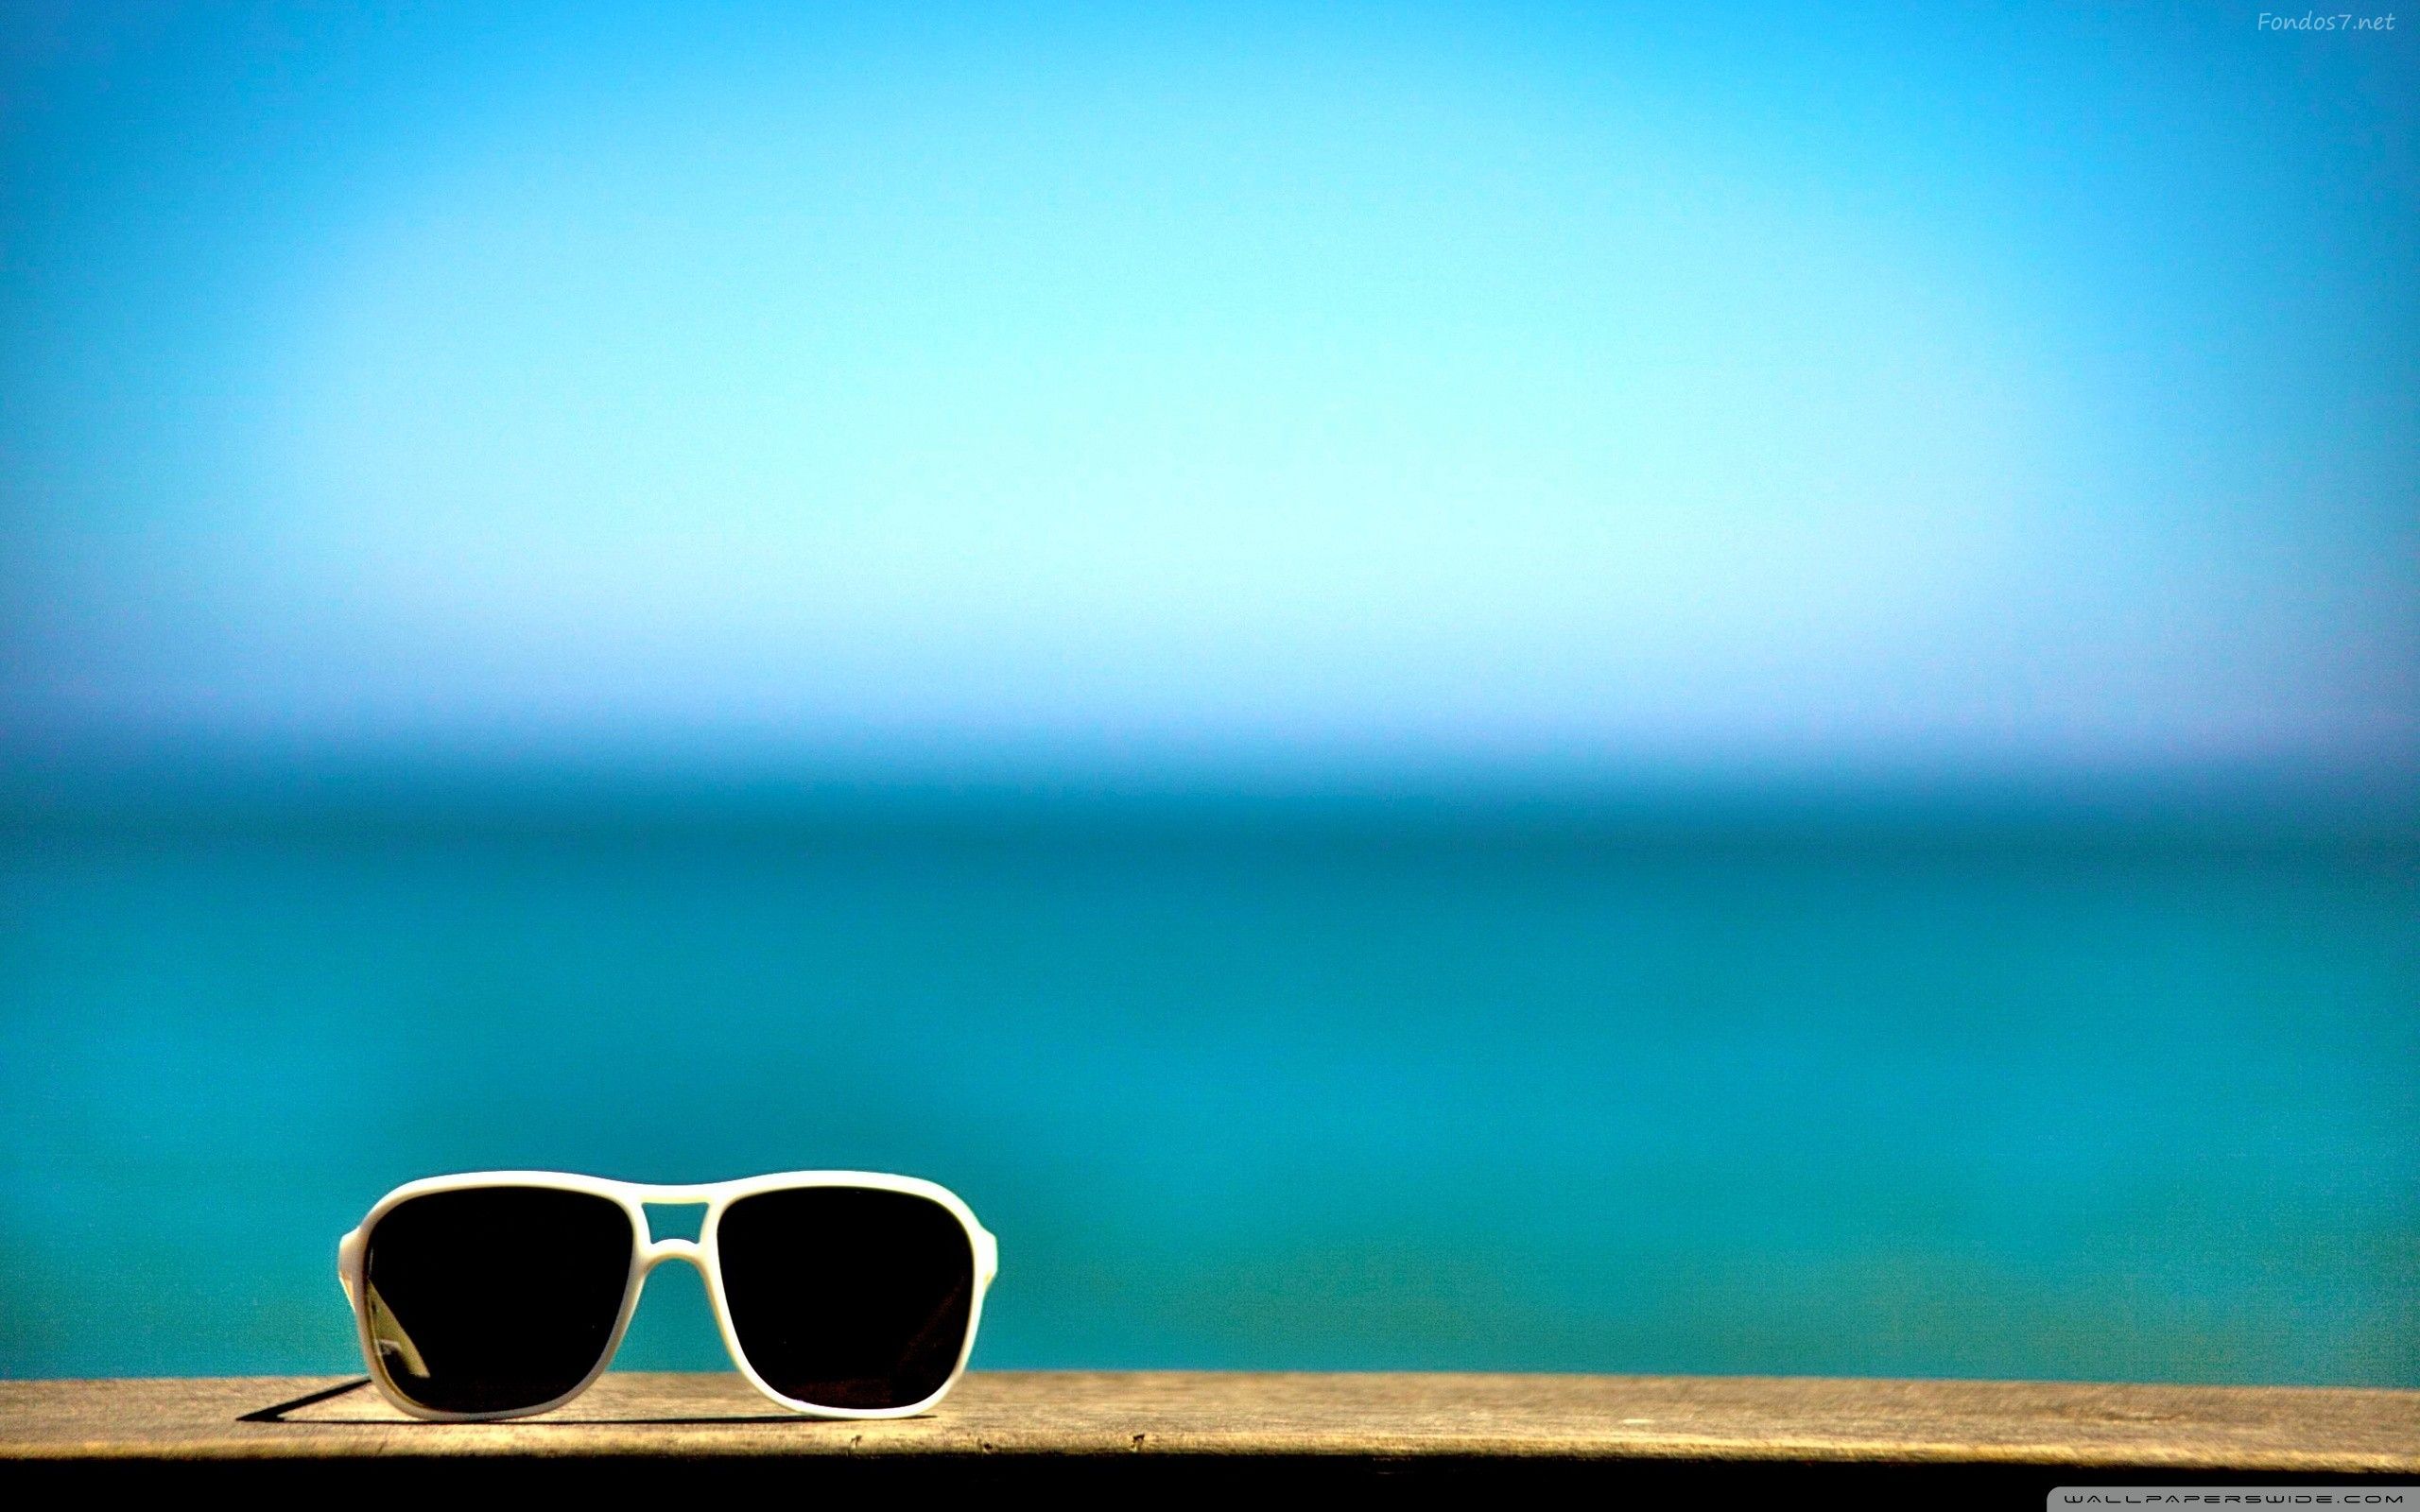 Blue, Summer, And Glasses Image Wallpaper 2560